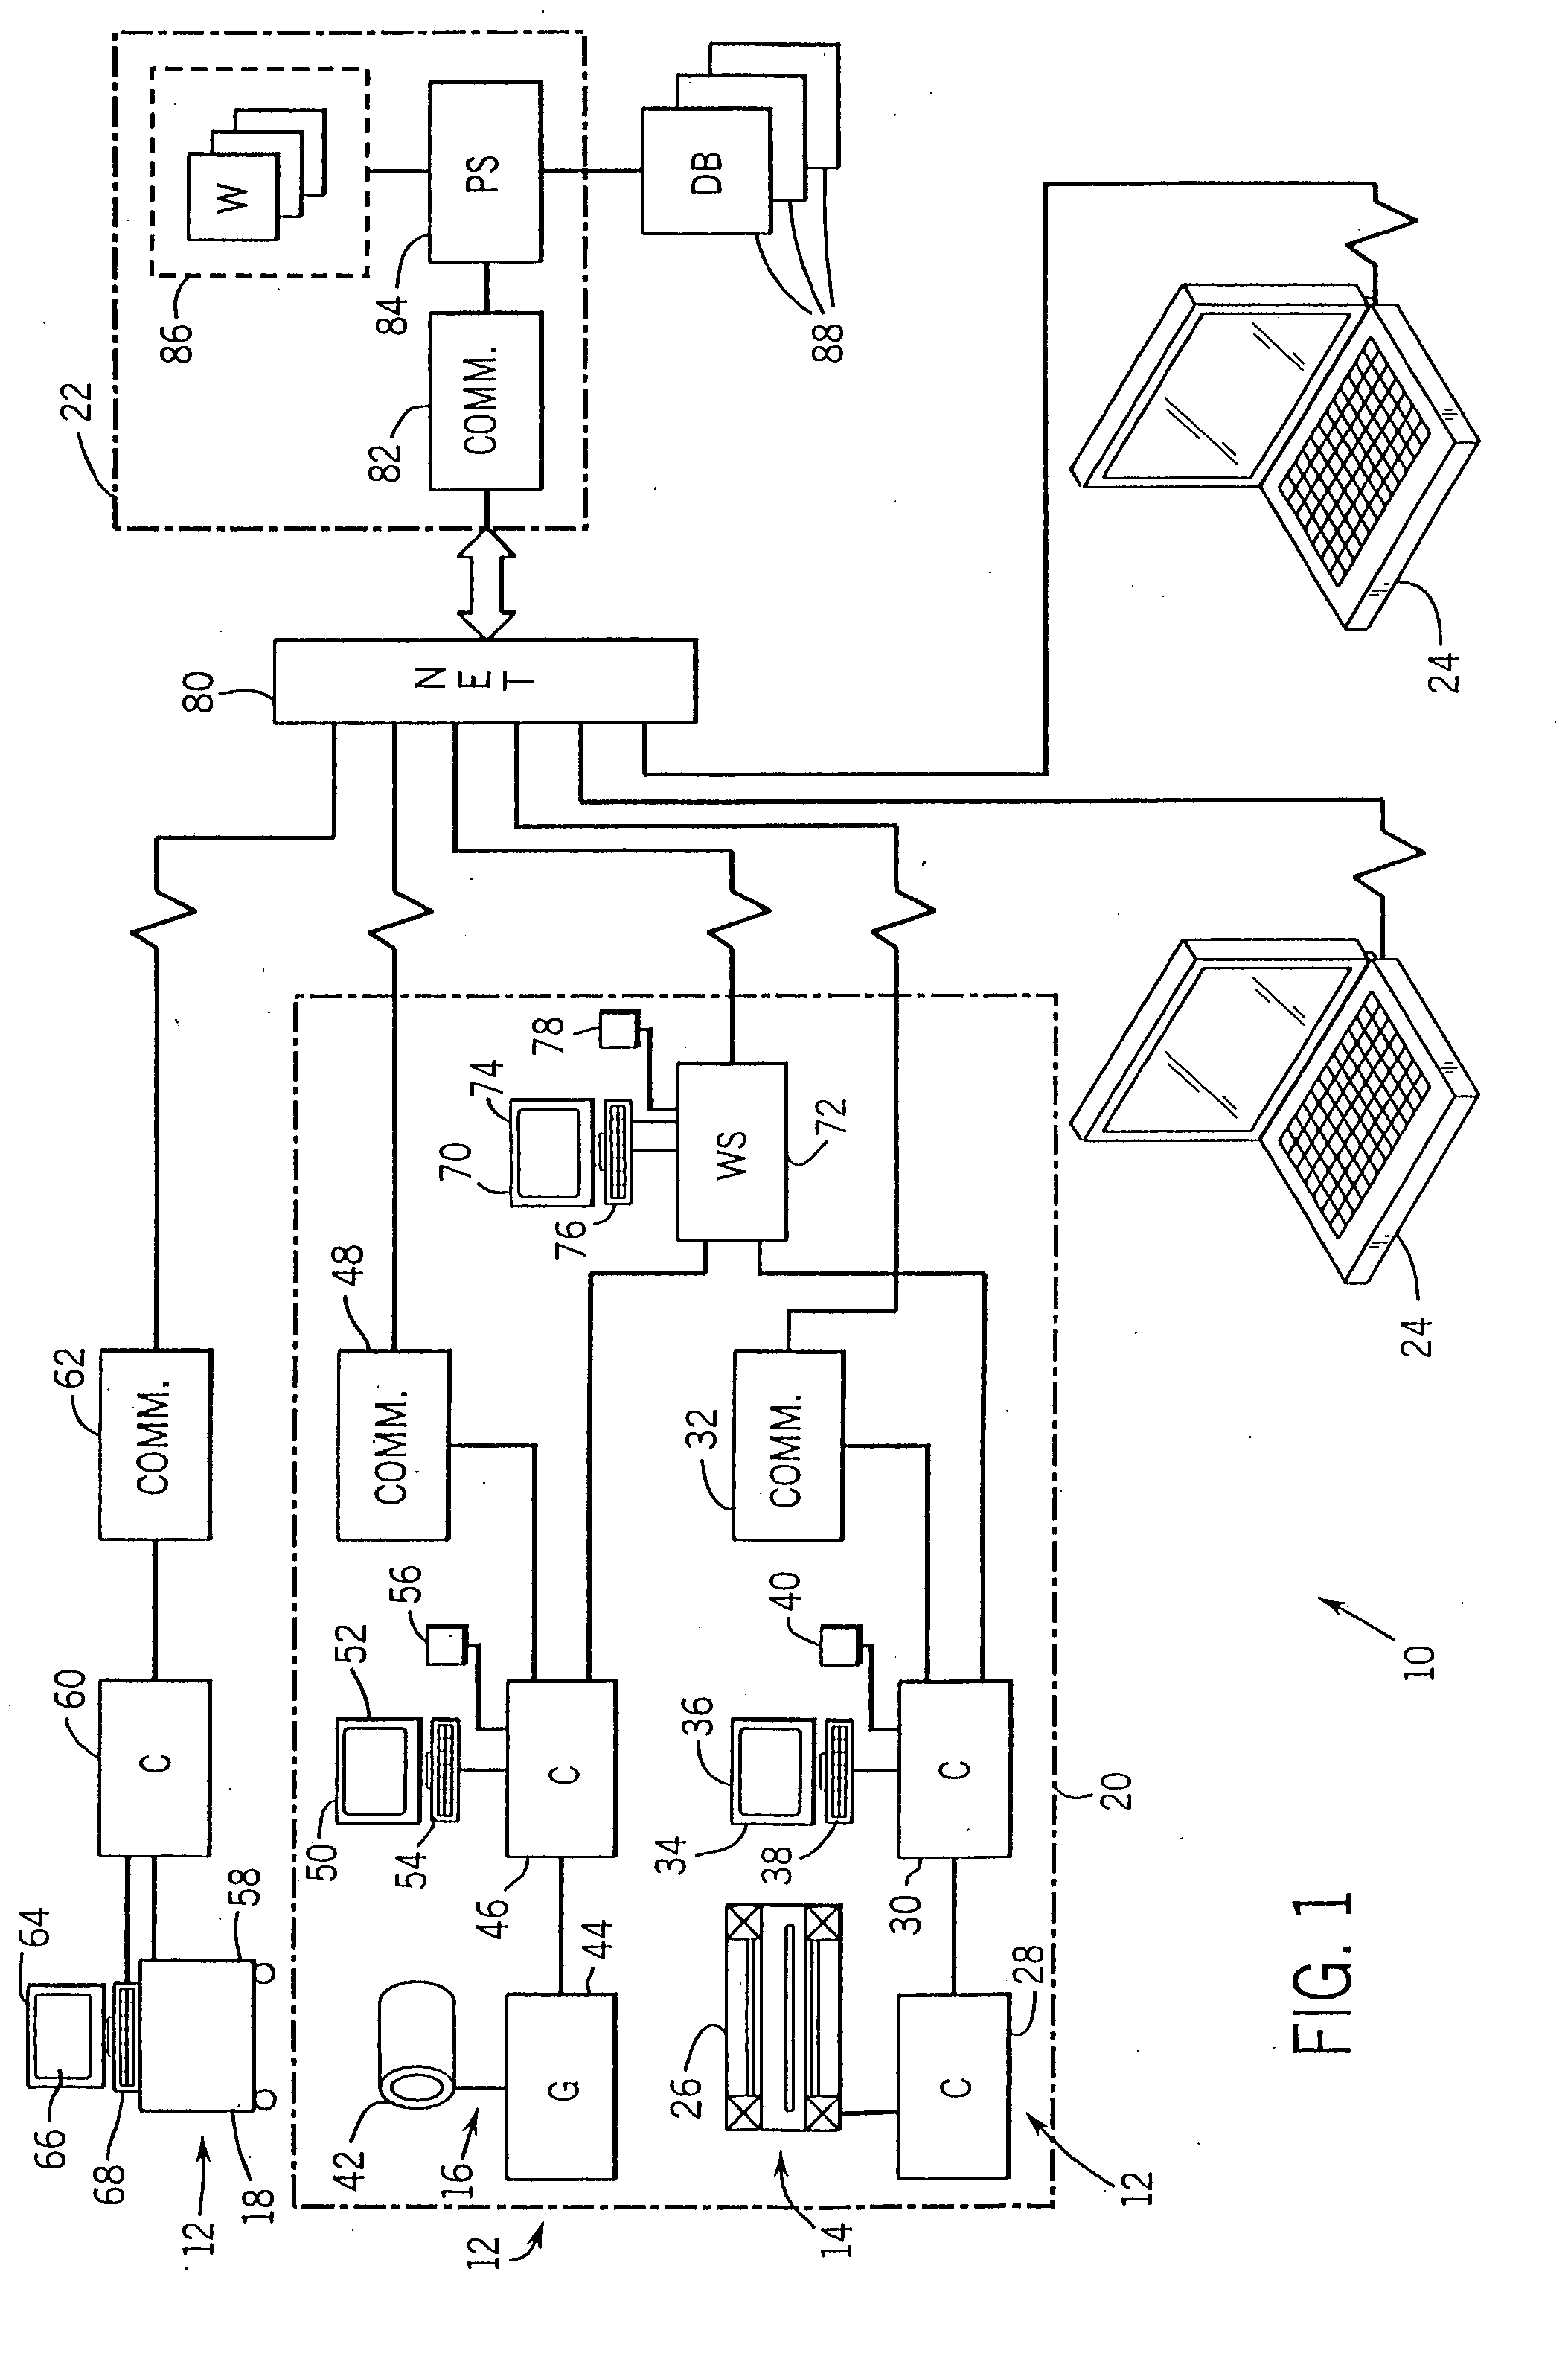 Imaging system protocol handling method and apparatus